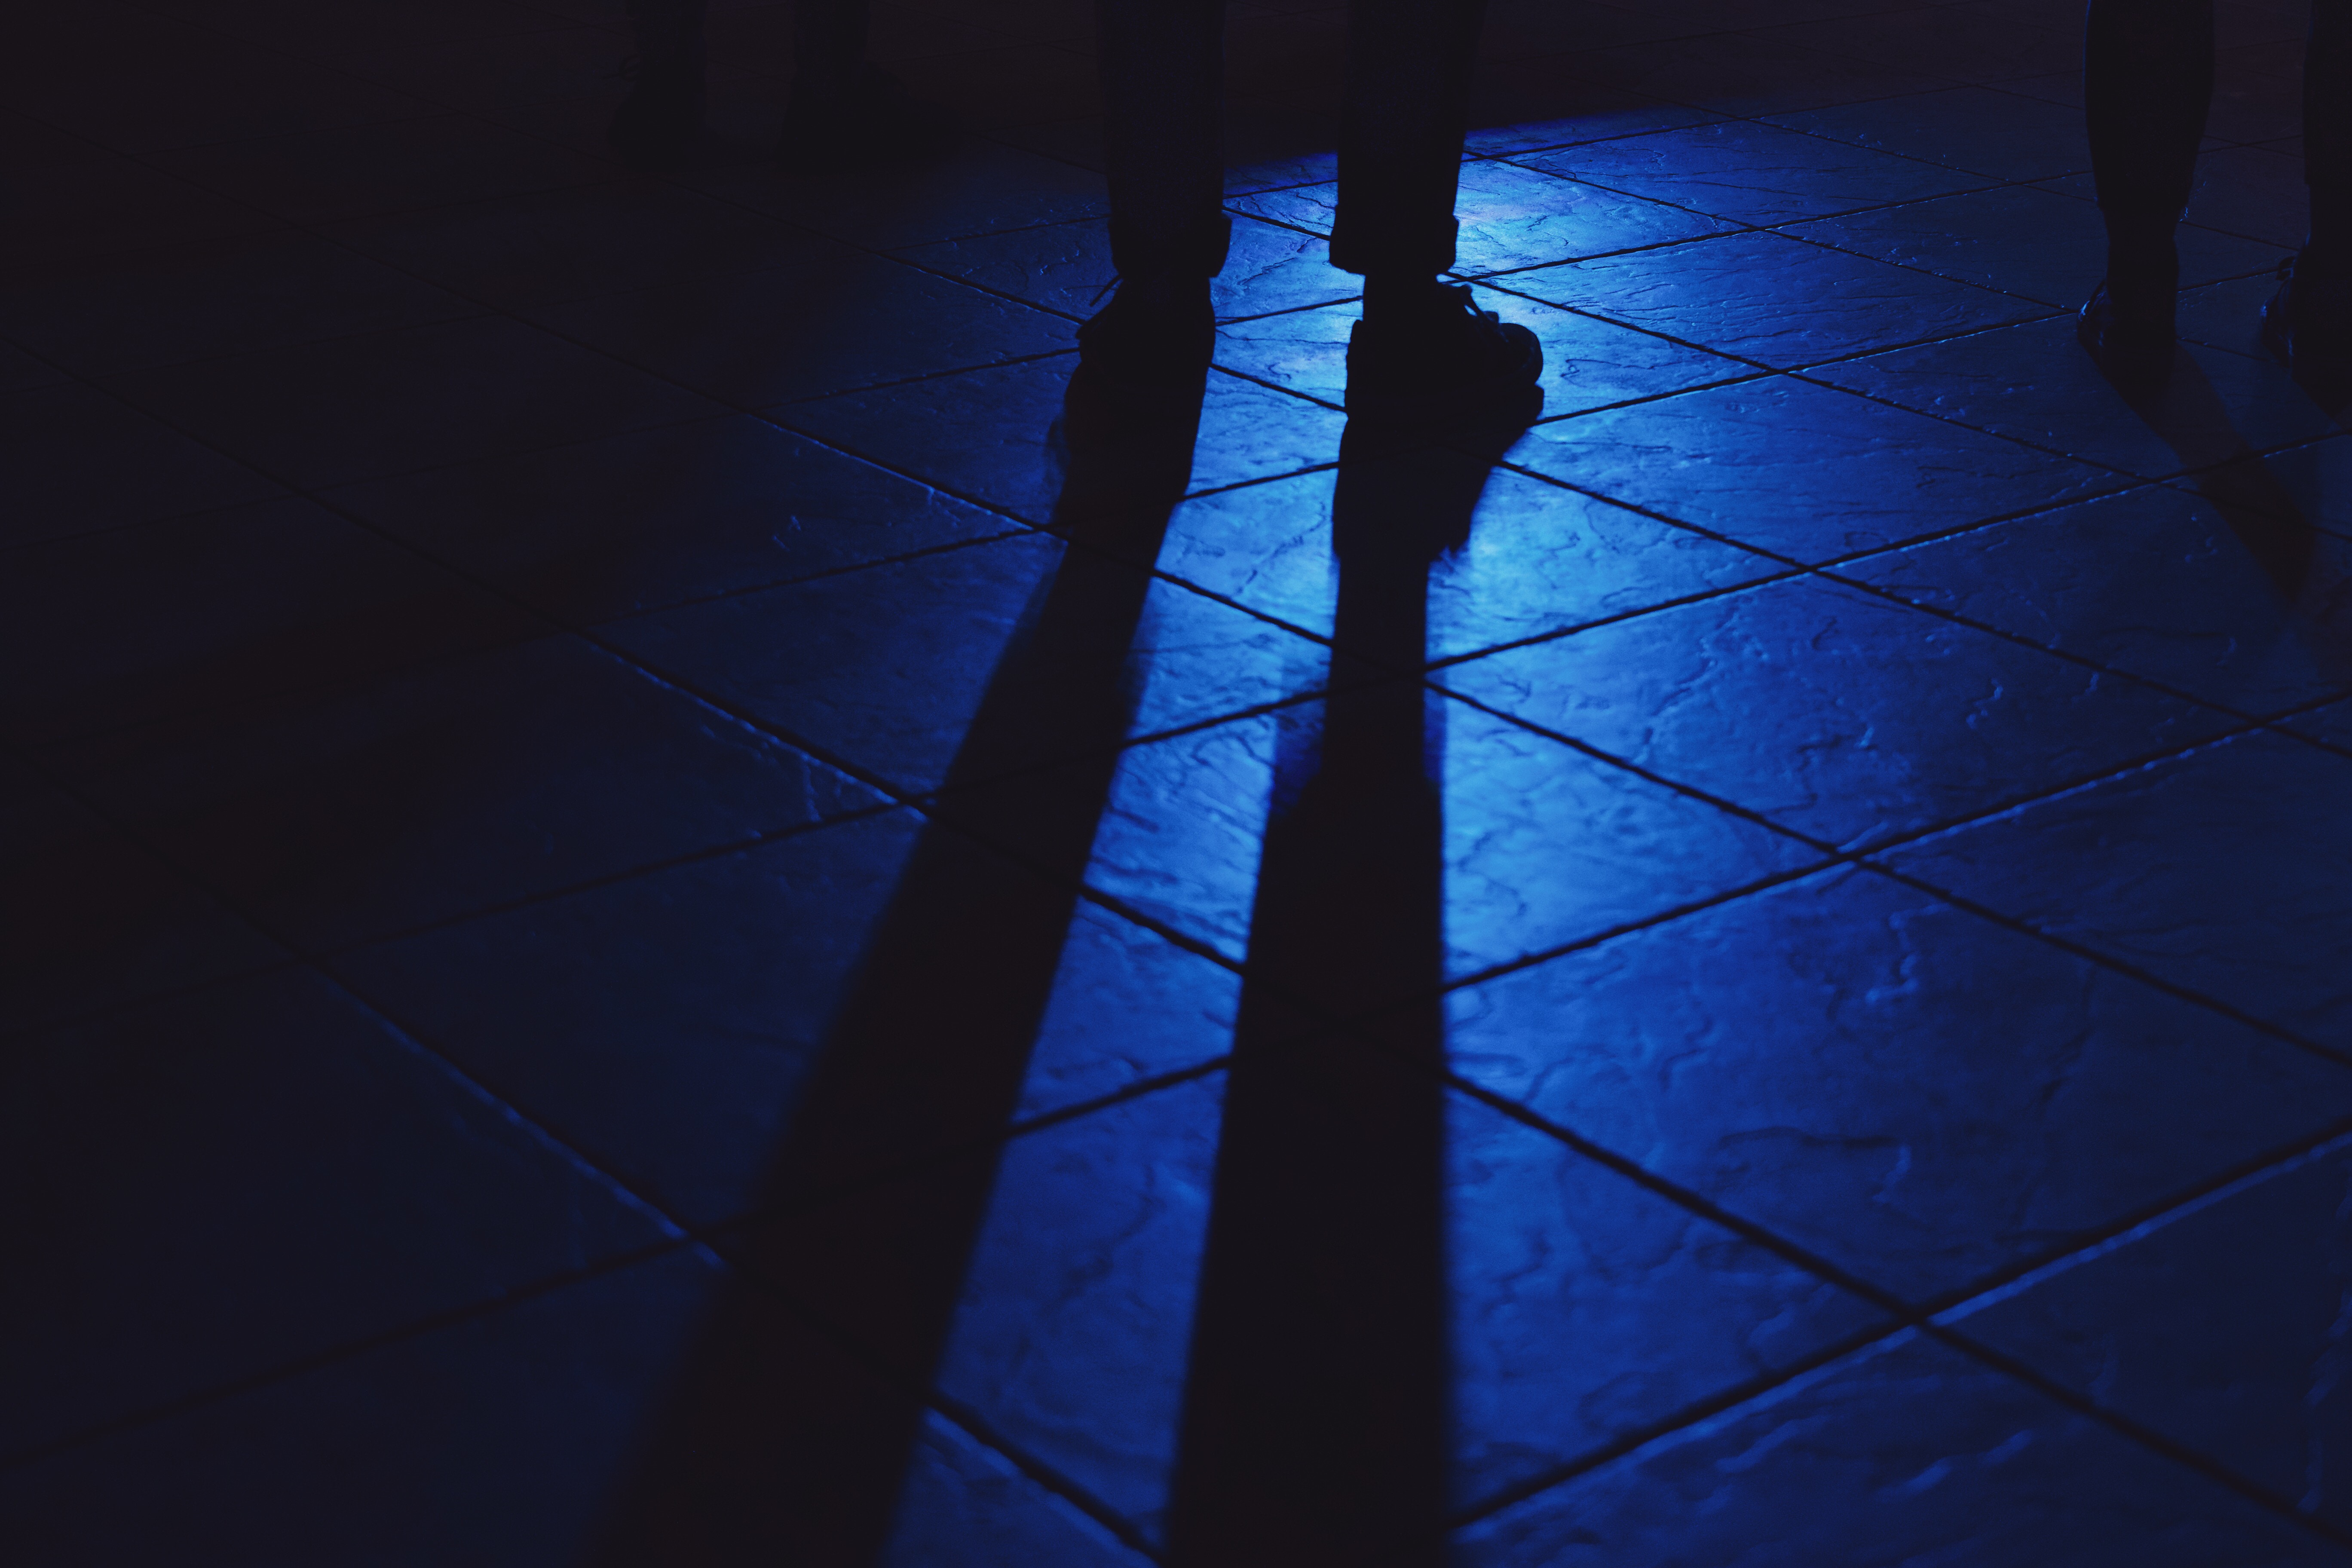 Blue Dark Blue People Silhouette Shadow Dark Shoes Photography Feet Lights Neon Lights Outline 5472x3648